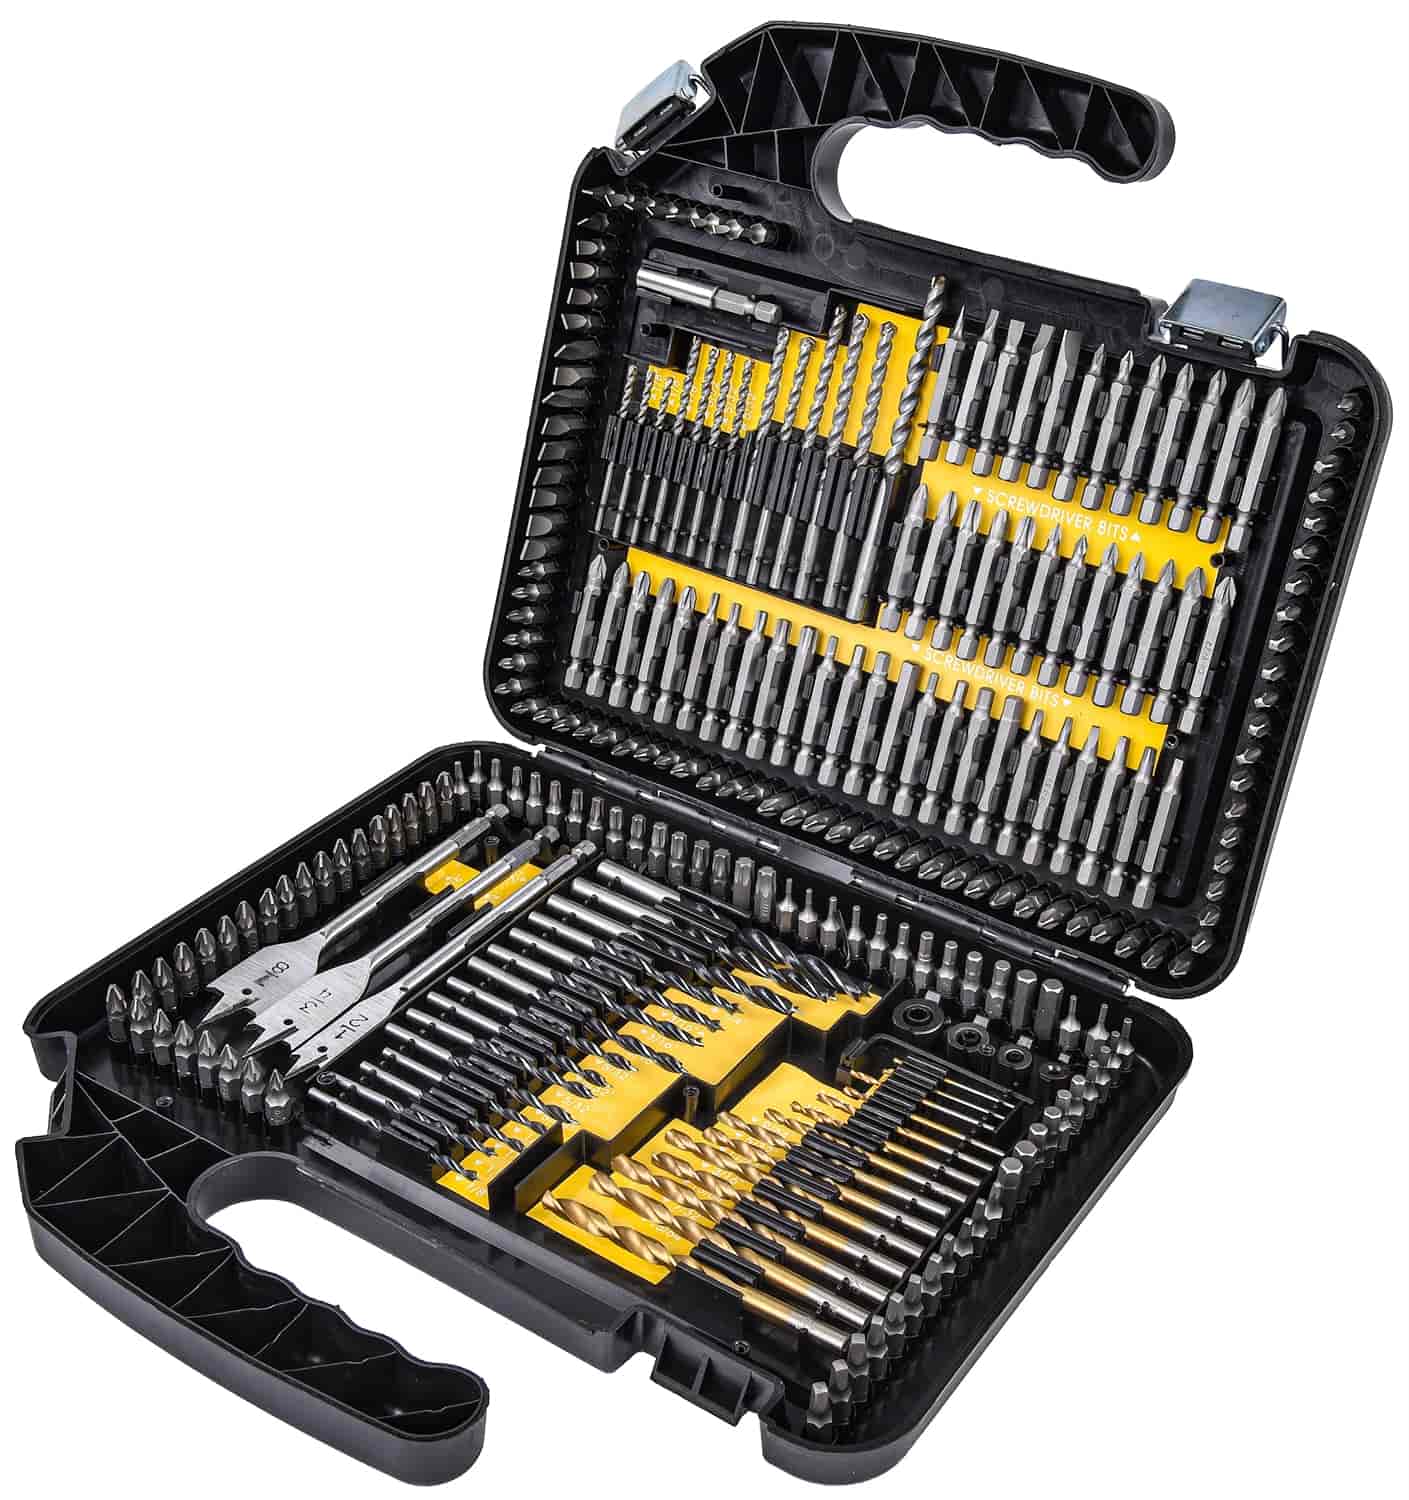 Driver and Drill Bit Set [253-piece]